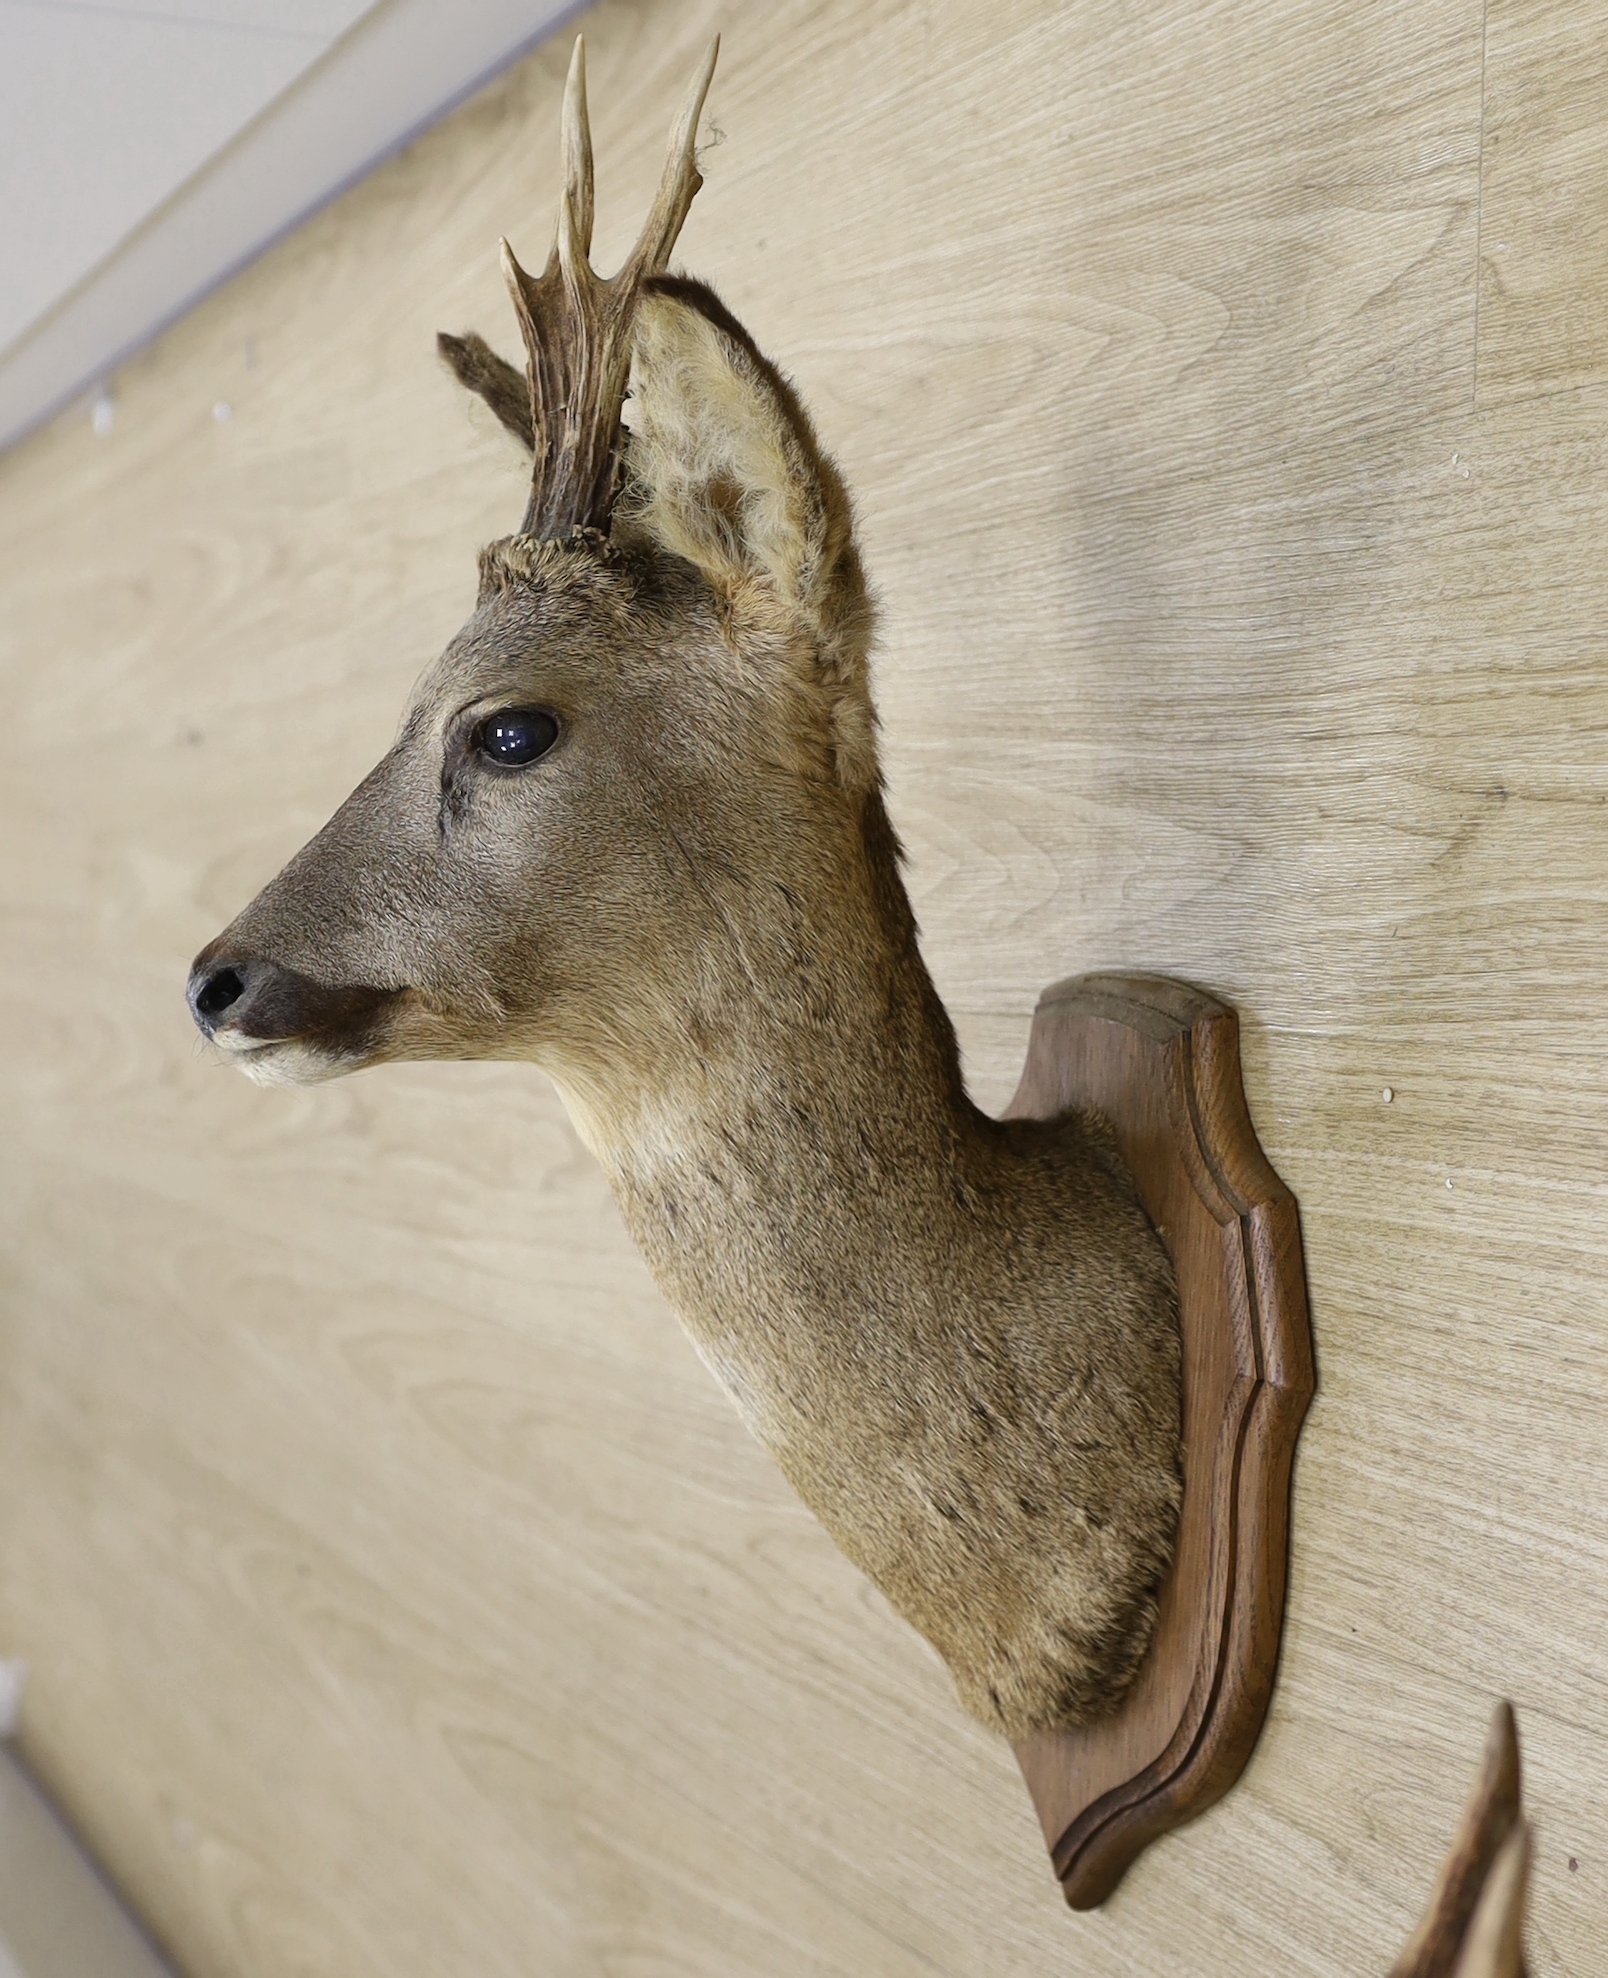 A pair of taxidermy deer heads, mounted on shield shaped plaques, approximately 65cm high